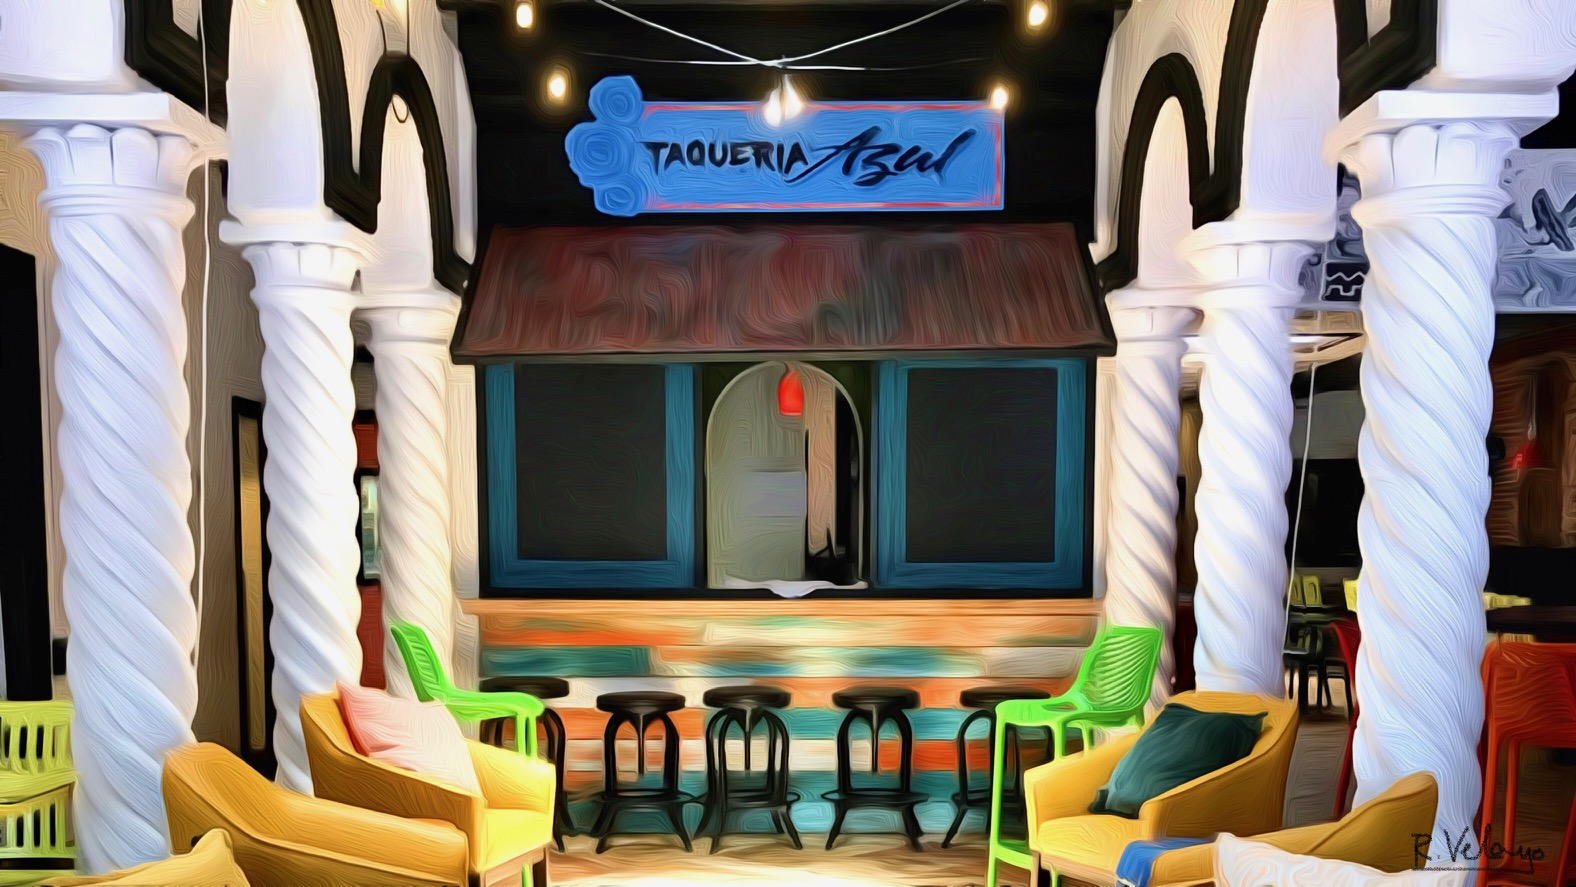 "LOUNGE SECTION AT TAQUERIA AZUL RESTAURANT IN DOWNTOWN SARASOTA" [Created: 8/30/2021]